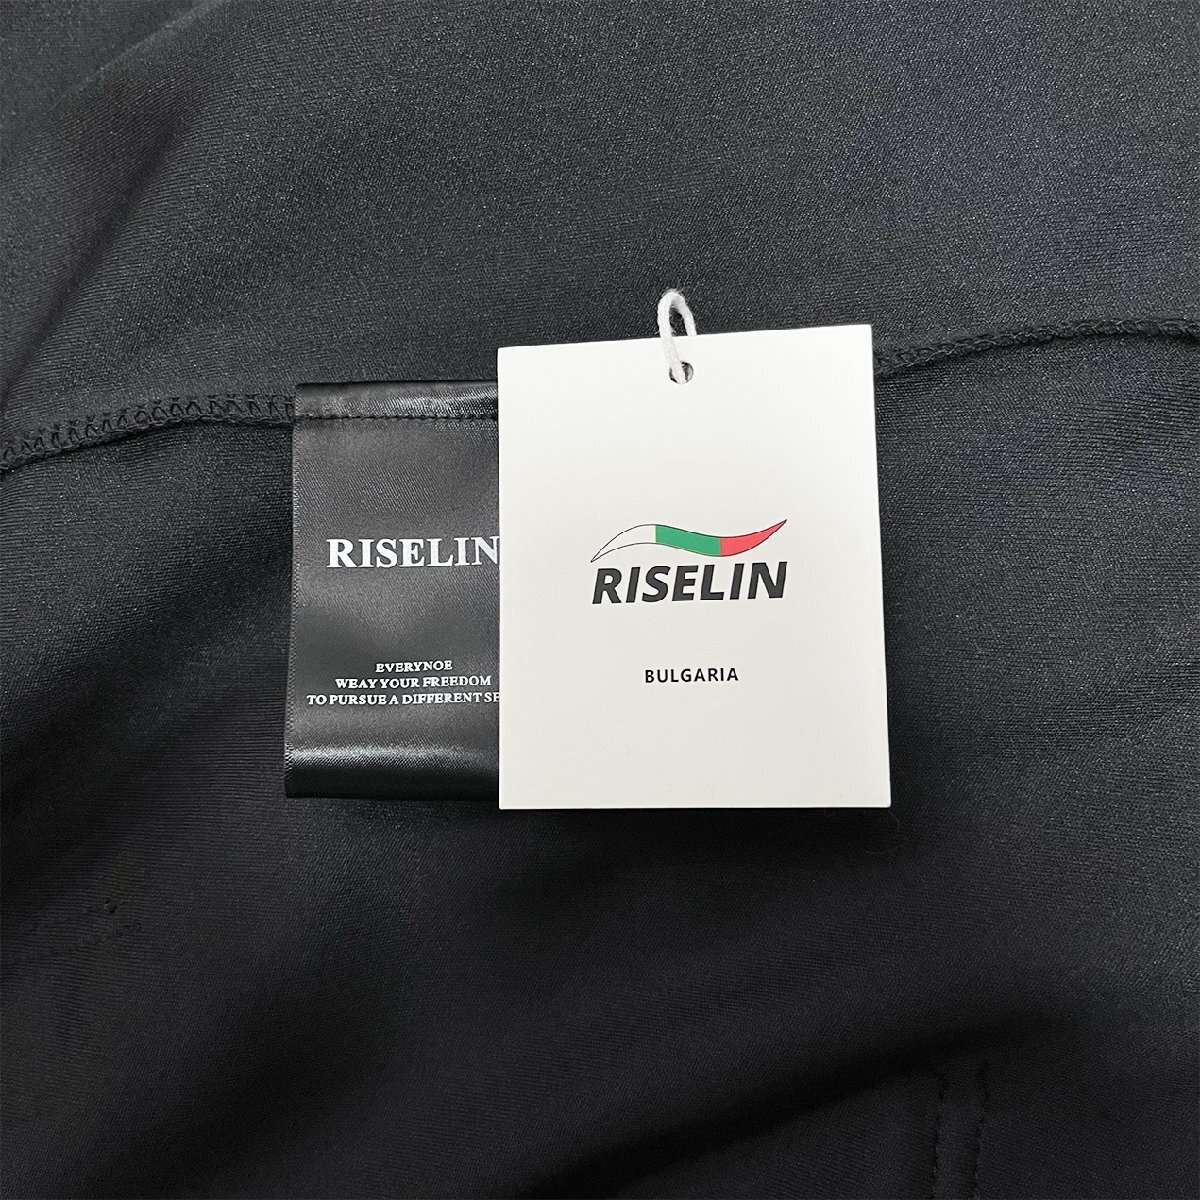  new work Europe made * regular price 4 ten thousand * BVLGARY a departure *RISELIN Parker on goods comfortable easy piece . tops sweat pull over popular 2XL/52